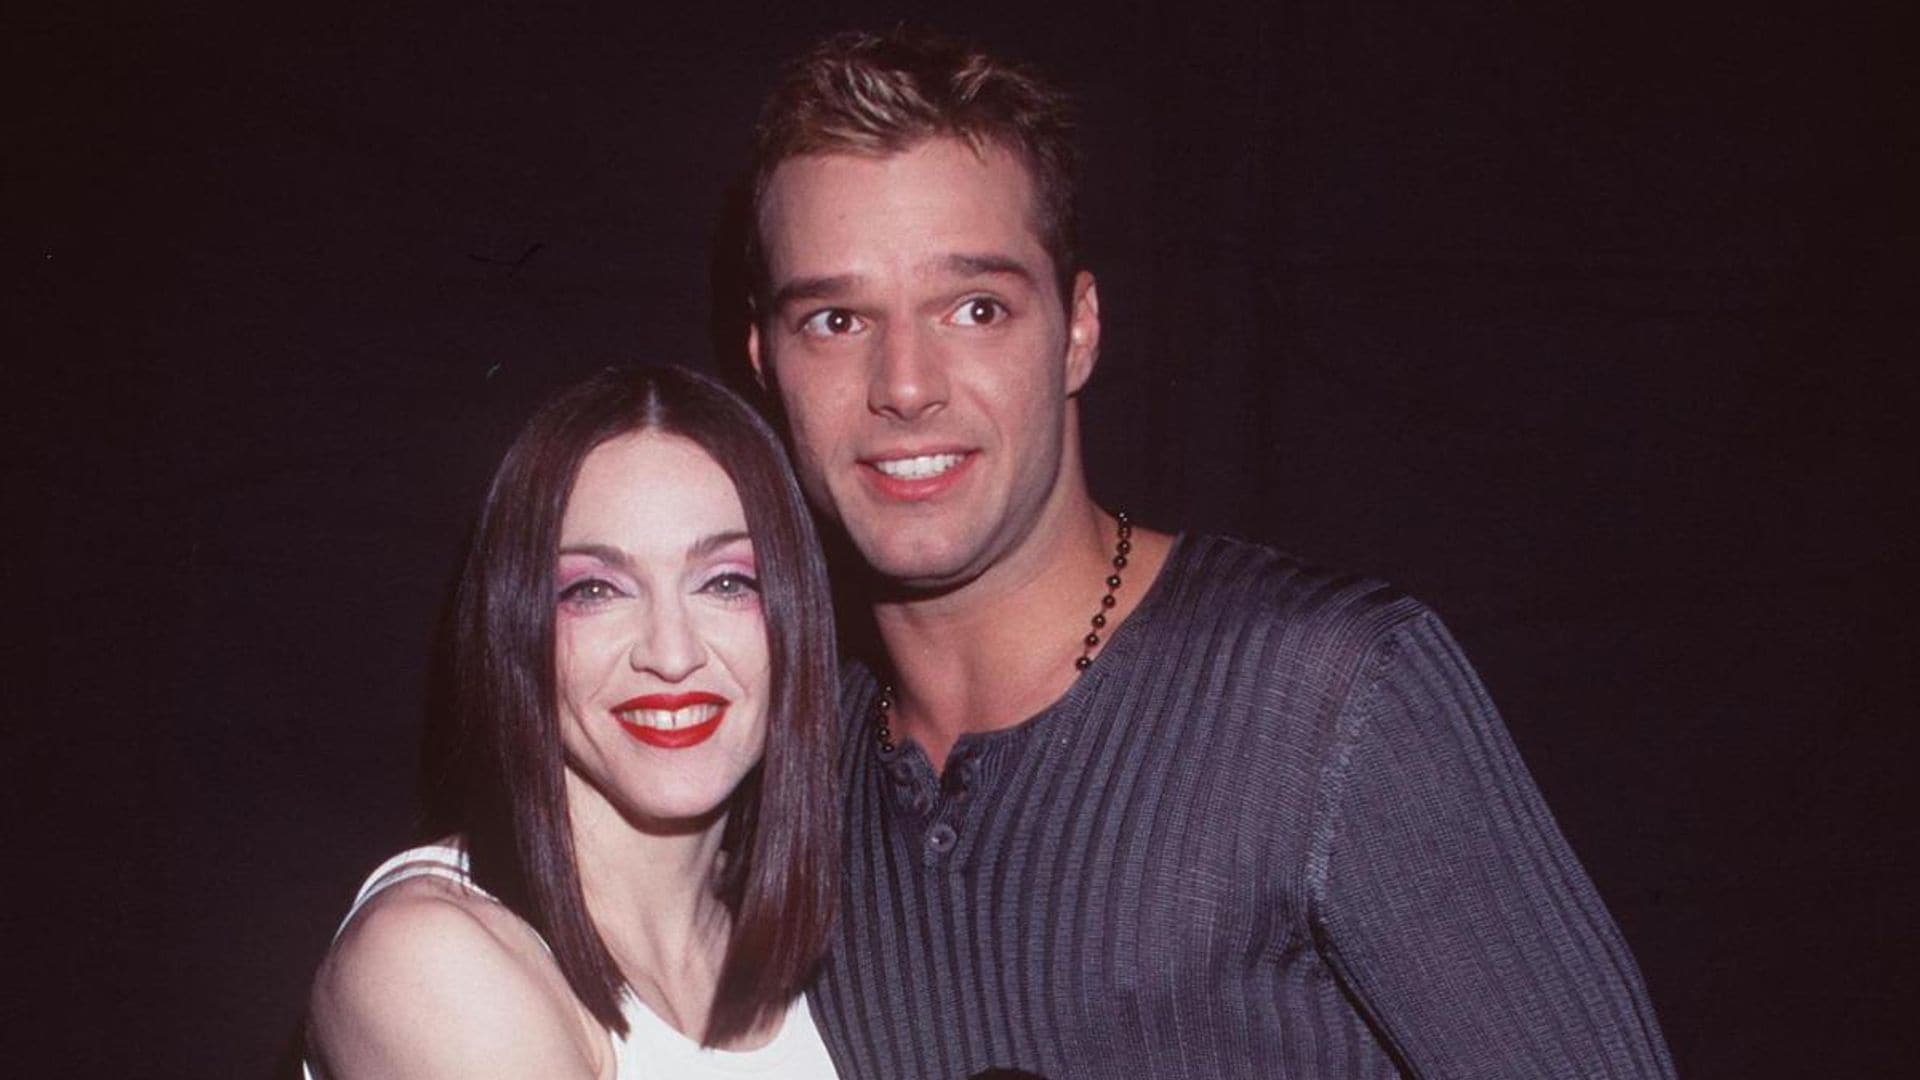 Ricky Martin reflects on the time he met Madonna